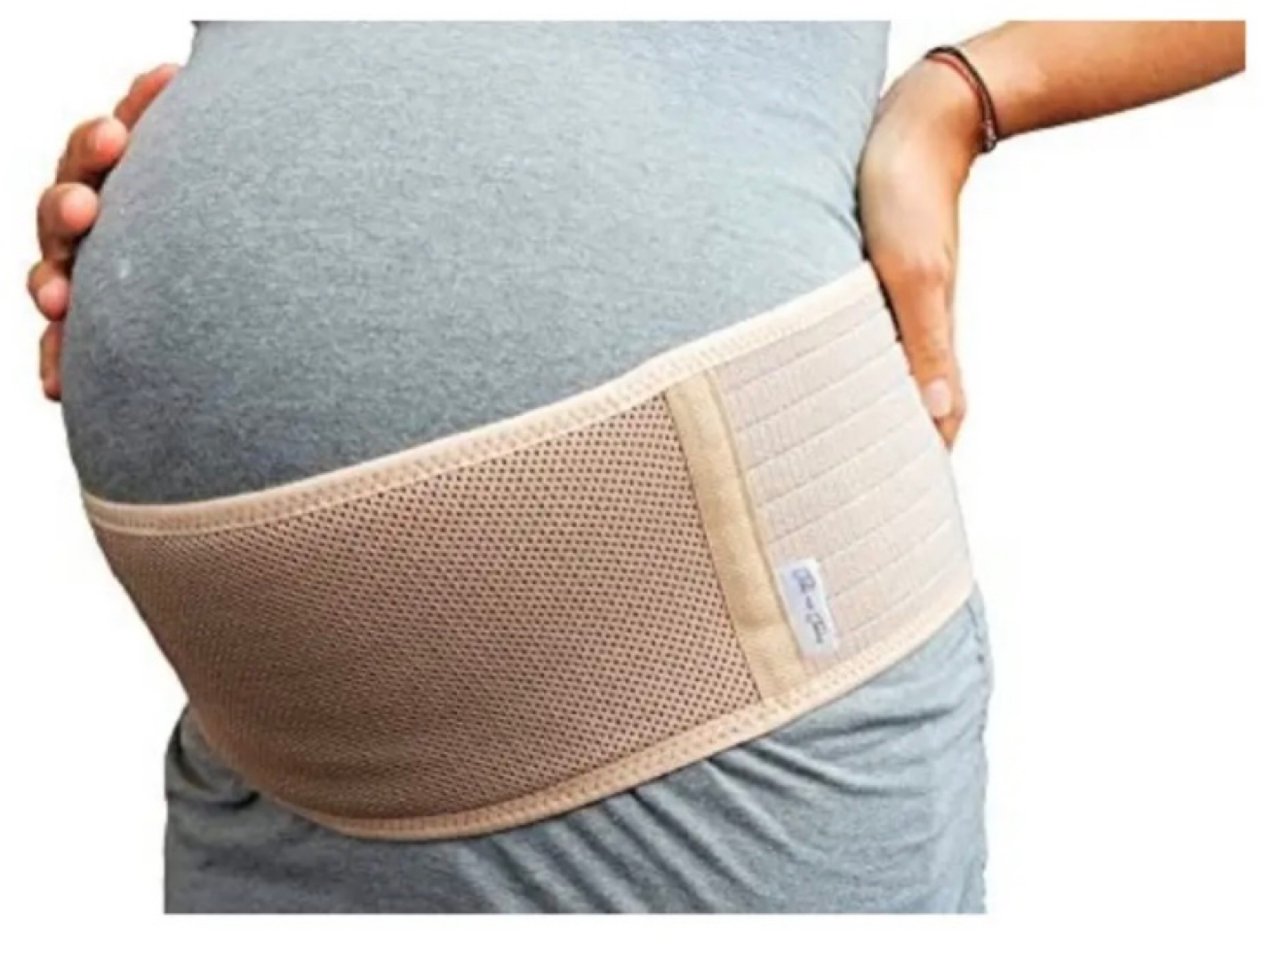 Jill & Joey Maternity Belt - Belly Band Back Brace - Pregnancy Must Haves - Pregnancy Belly Support Band - Back Support - Belly Band for Pregnancy (Medium) : Clothing, Shoes & Jewelry